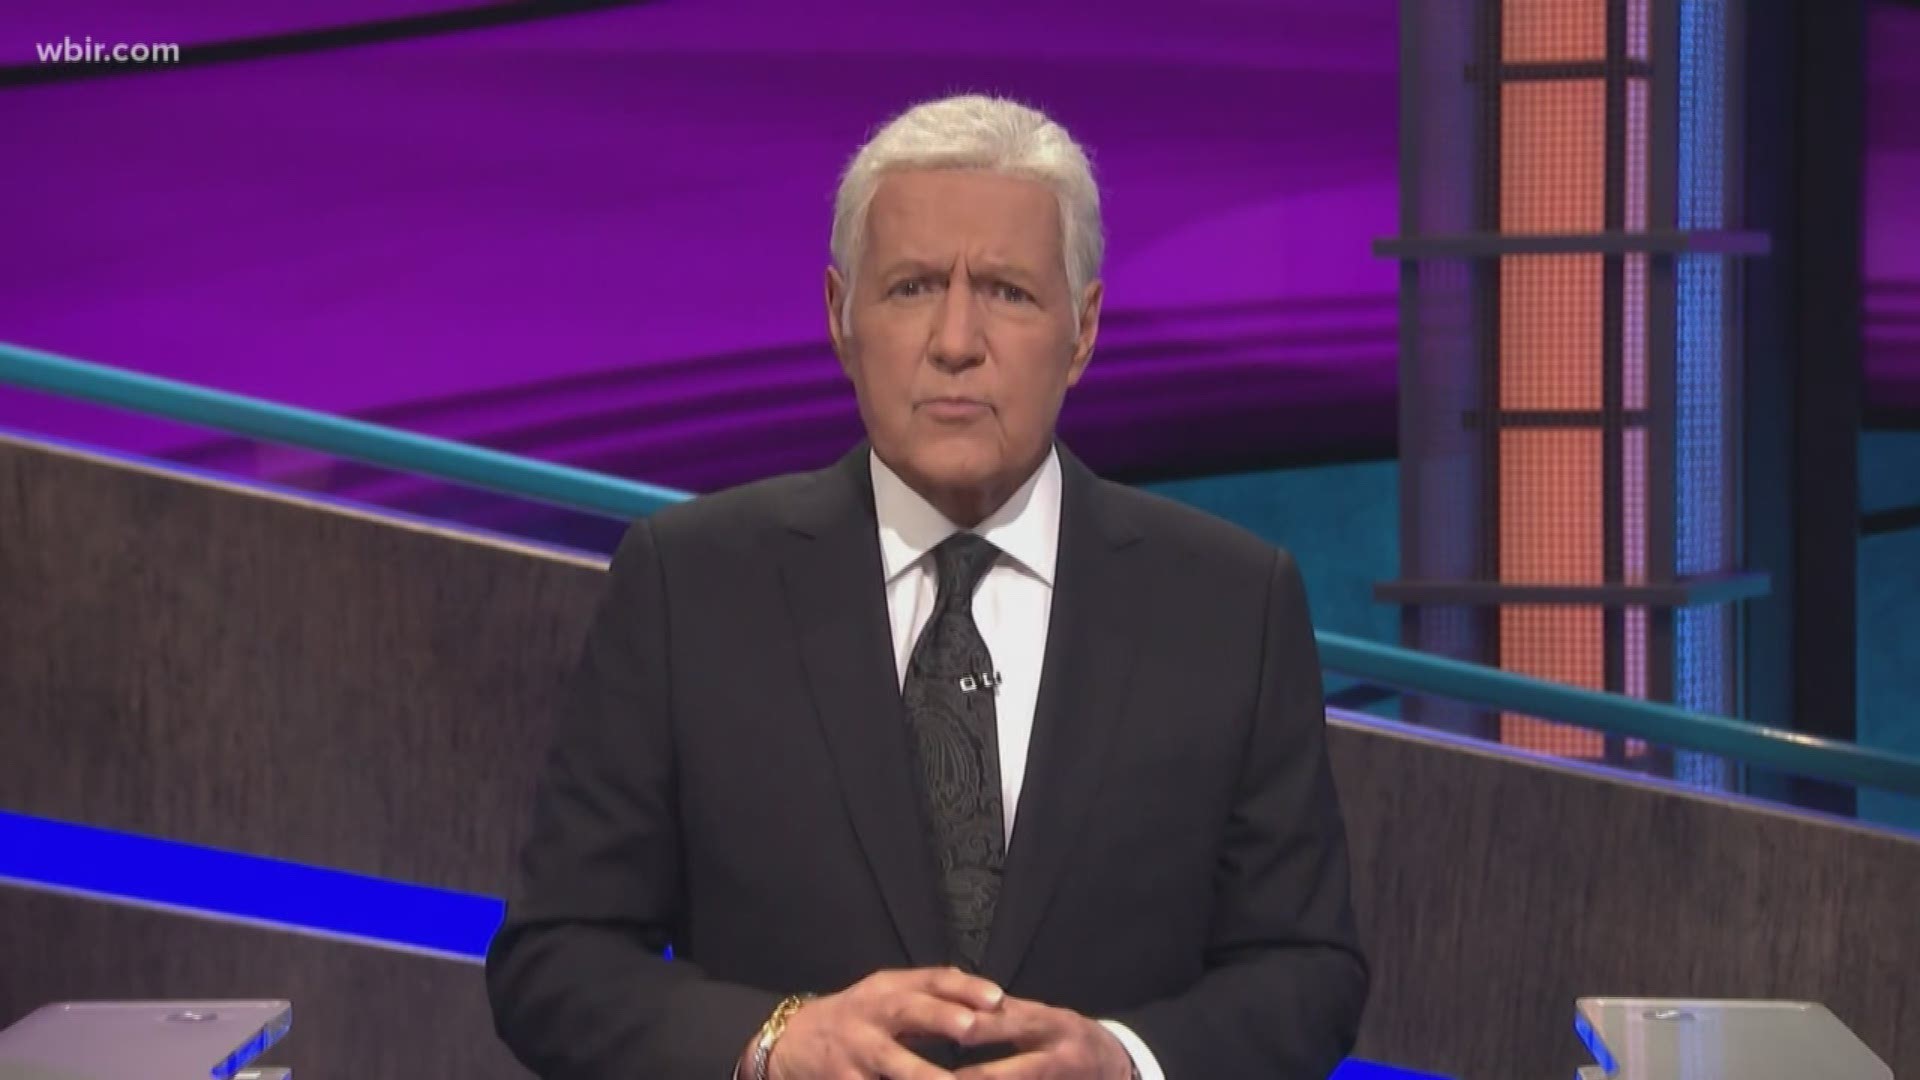 Jeopardy host Alex Trebek gave a one-year update on his fight against cancer over social media Wednesday.